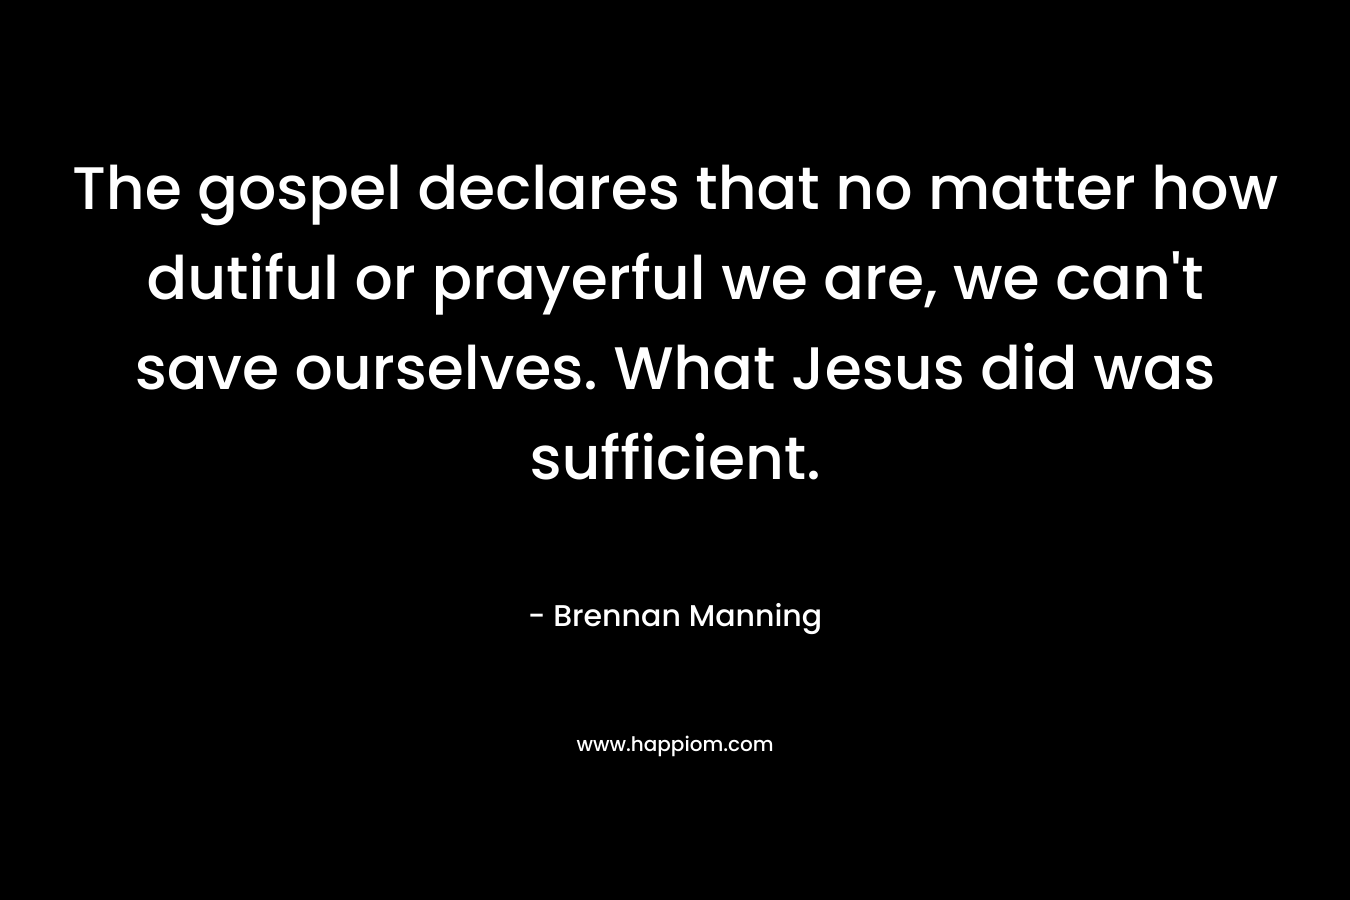 The gospel declares that no matter how dutiful or prayerful we are, we can’t save ourselves. What Jesus did was sufficient. – Brennan Manning